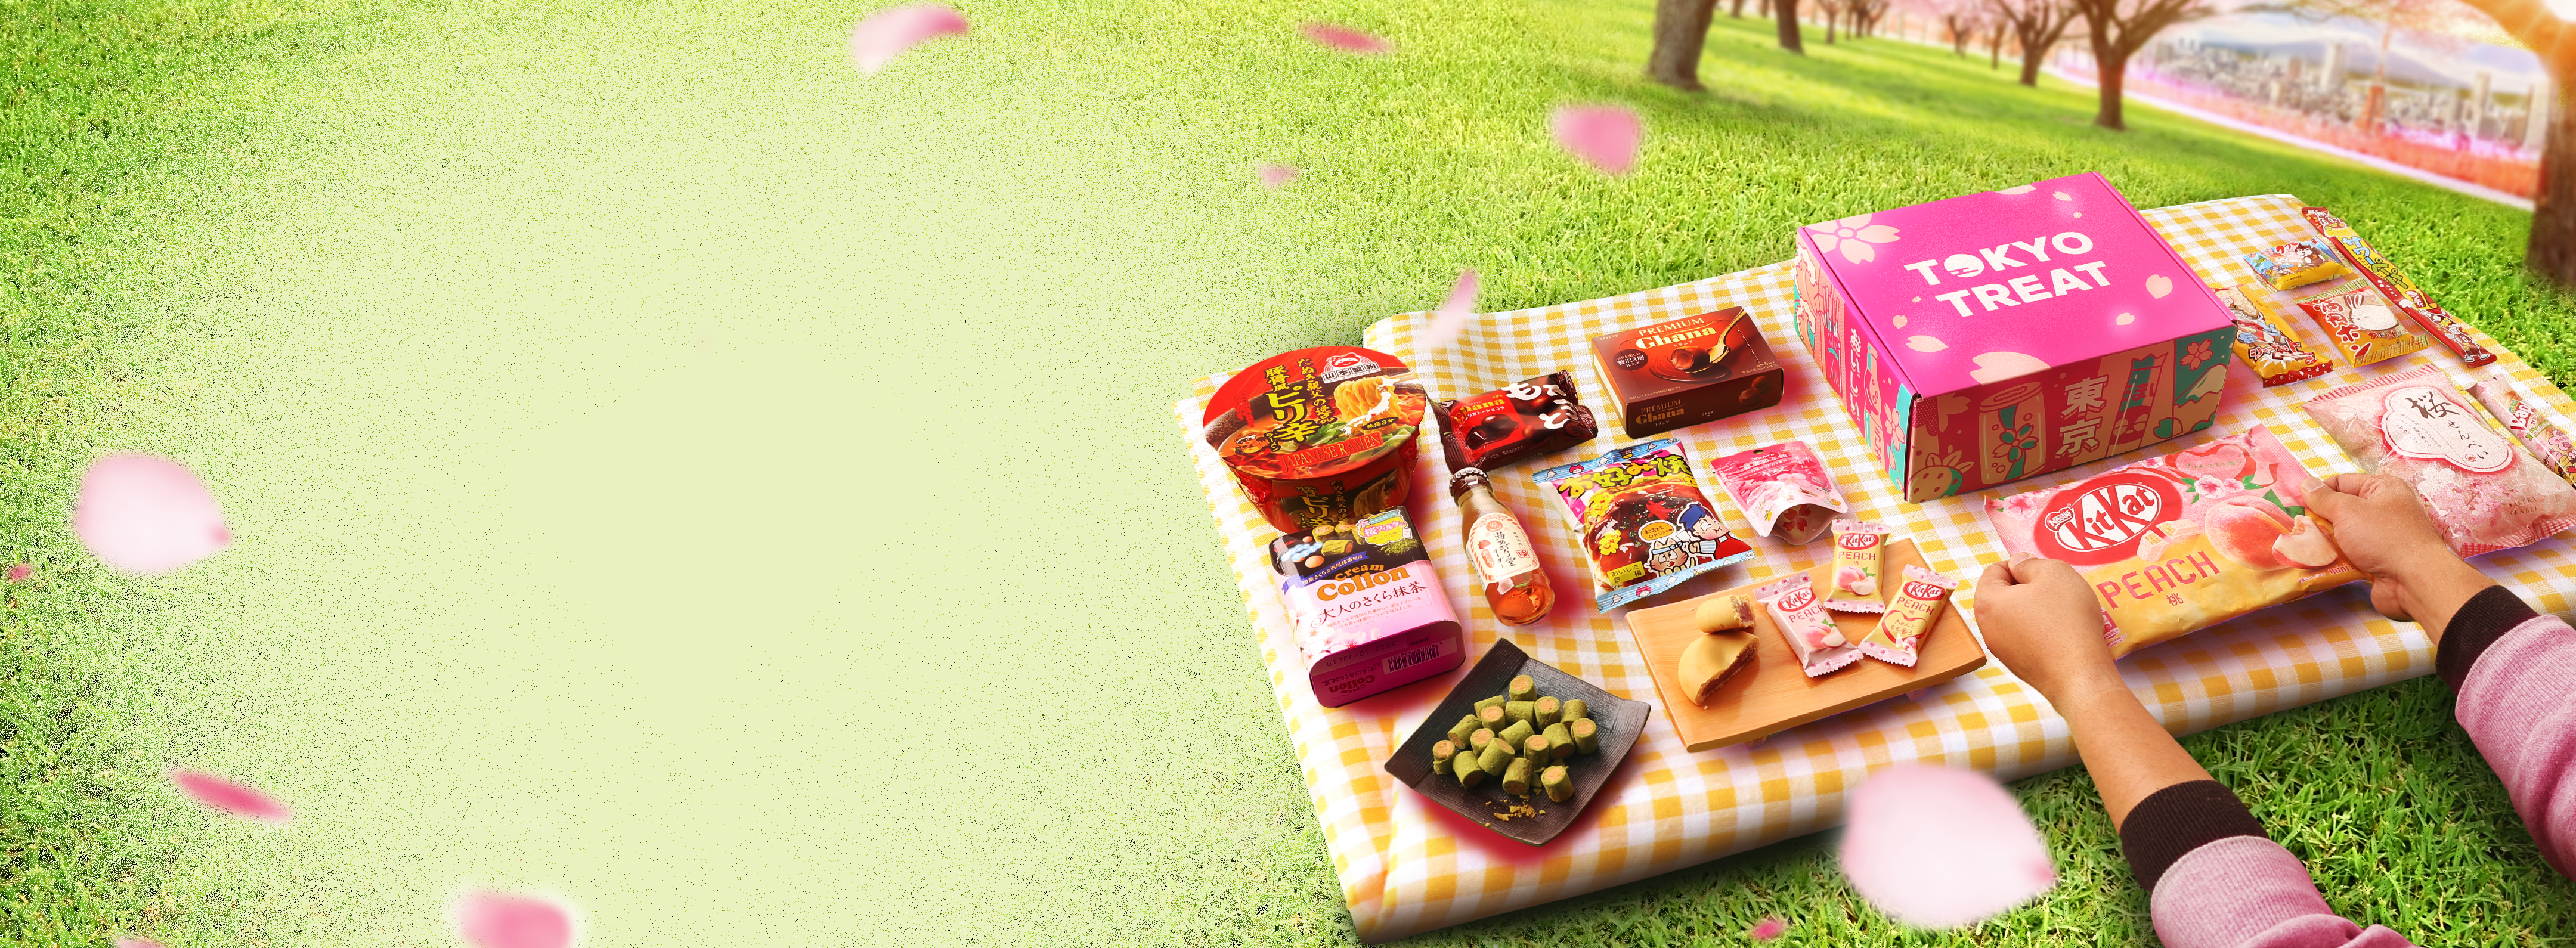 TokyoTreat box sits atop a picnic blanket at a grassy Tokyo park, surrounded by box items and cherry blossom petals.